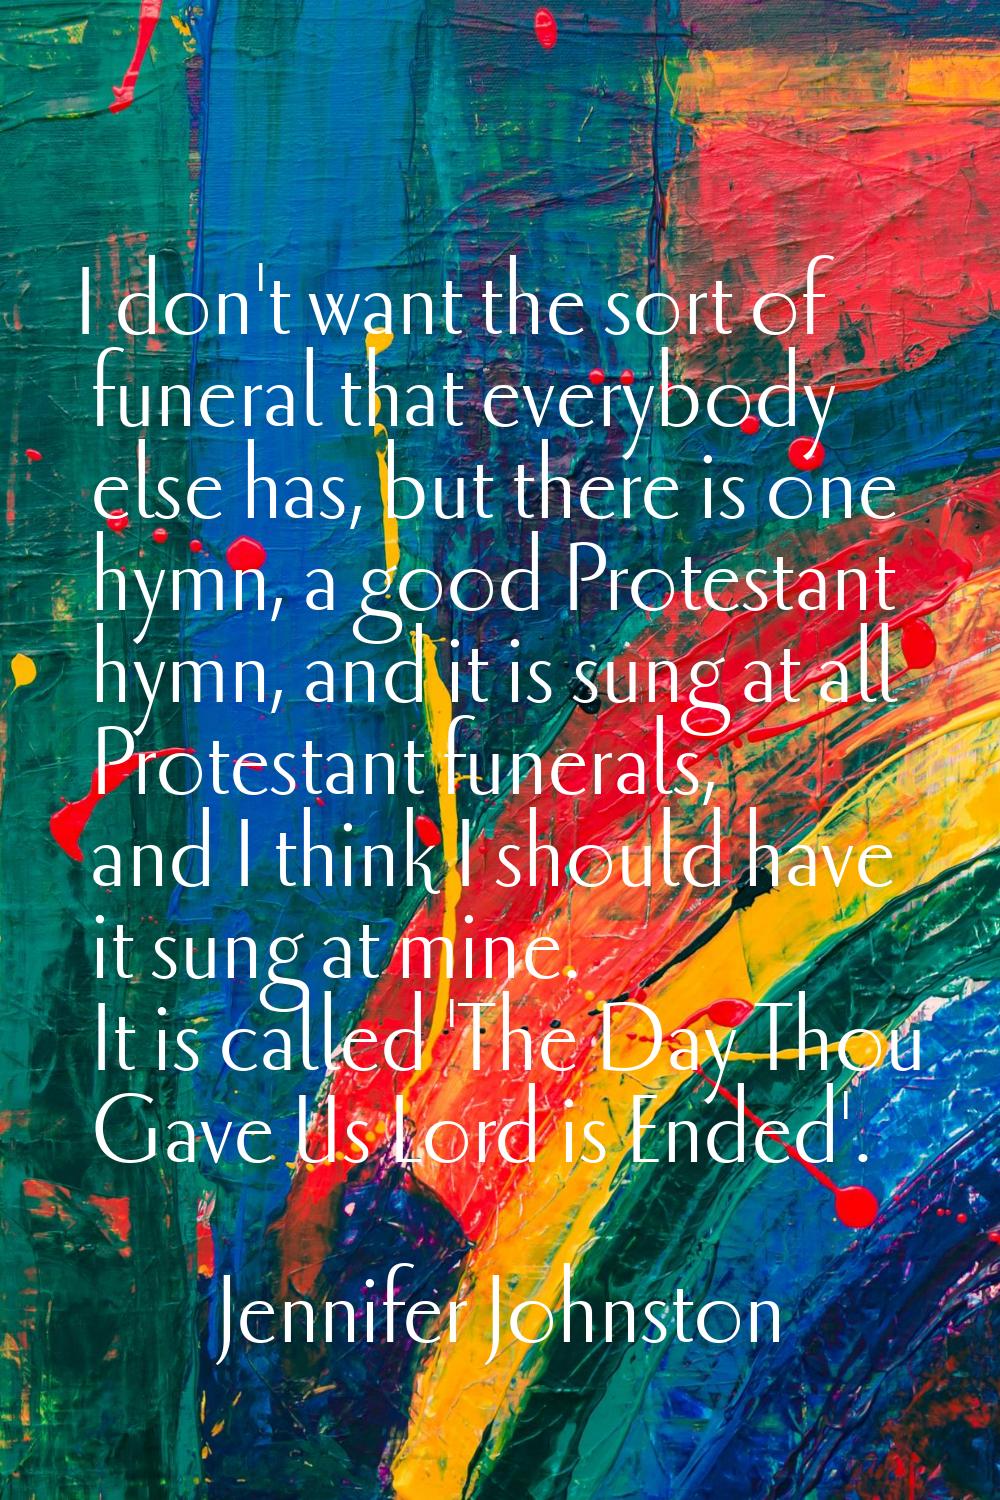 I don't want the sort of funeral that everybody else has, but there is one hymn, a good Protestant 